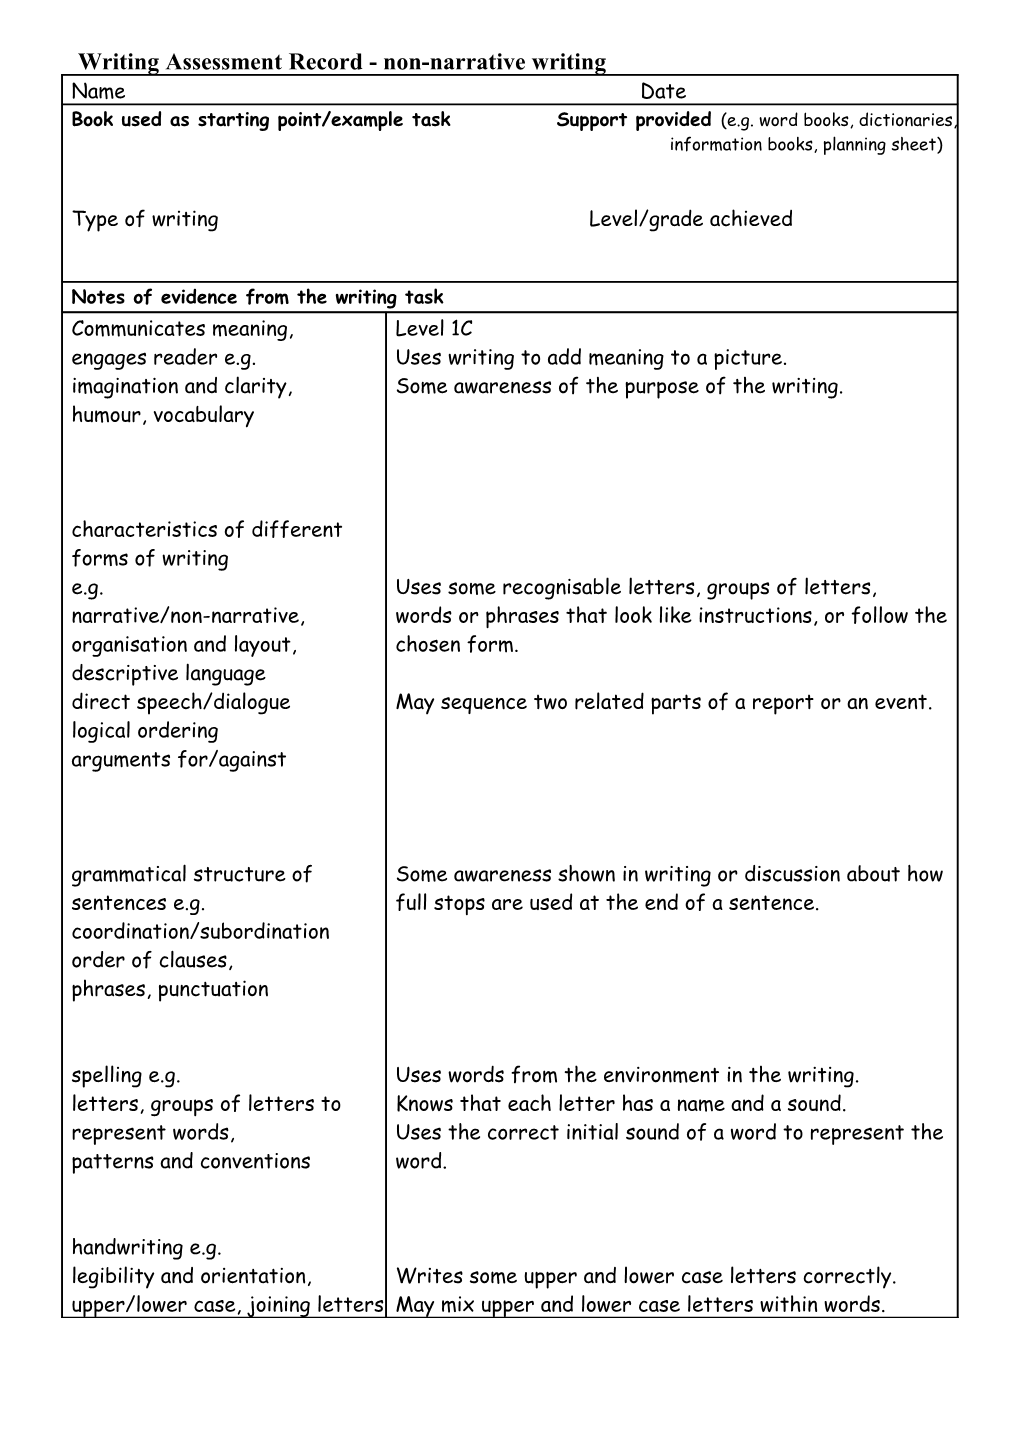 Writing Assessment Record